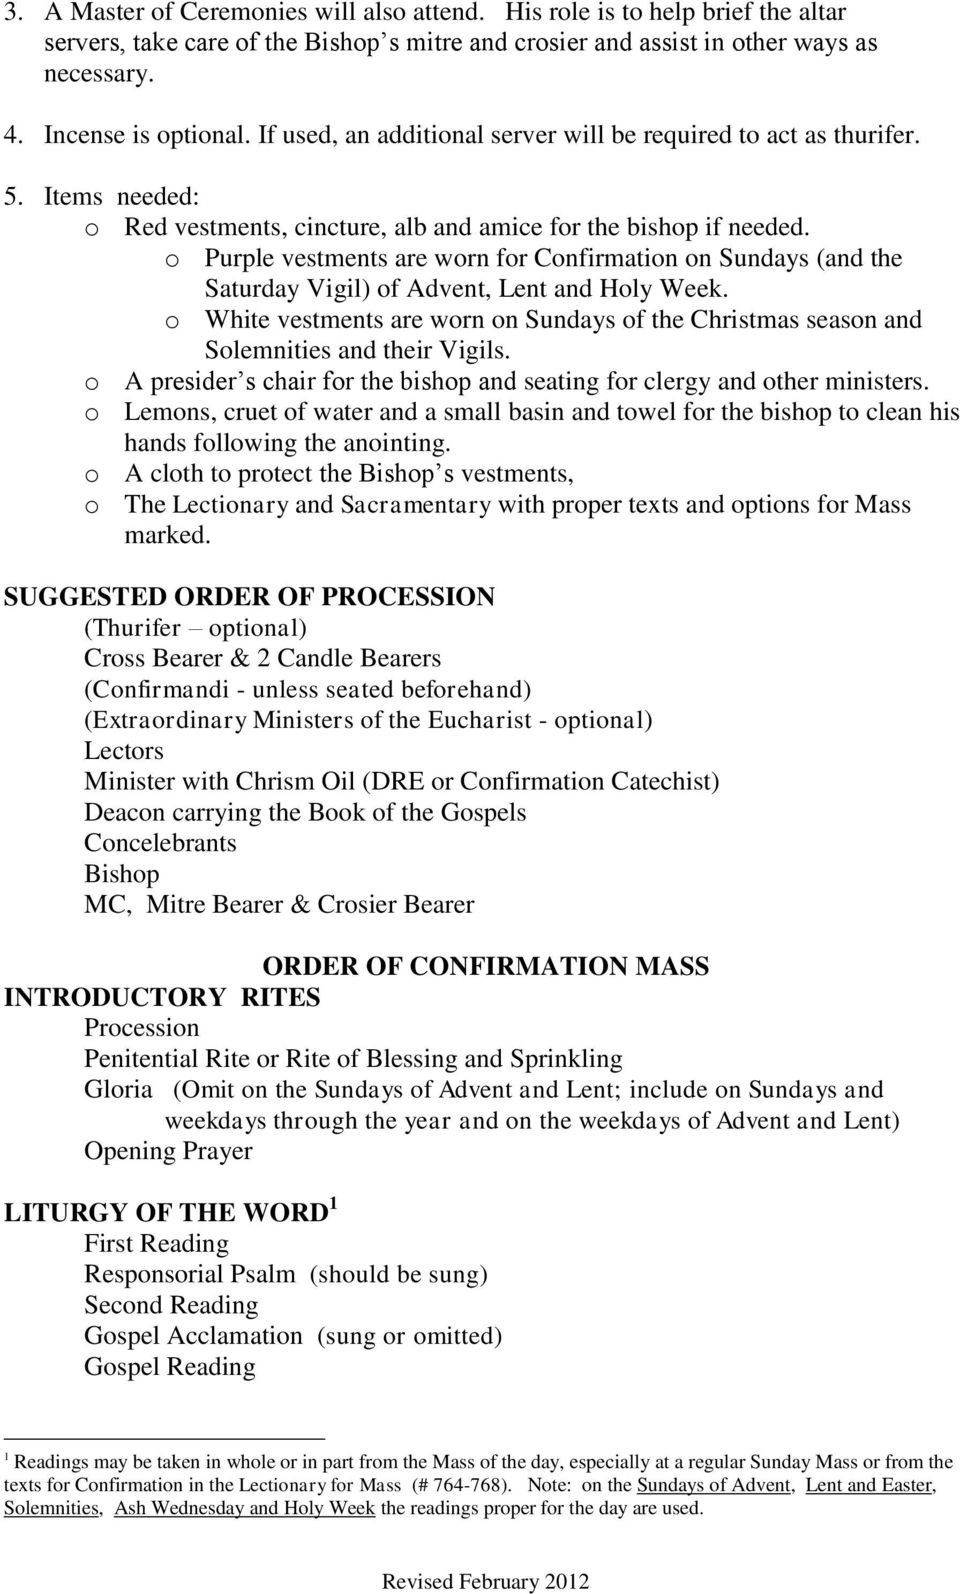 Order Of the Mass Worksheet the Confirmation Liturgy 1 Overview 2 Practical Matters 3